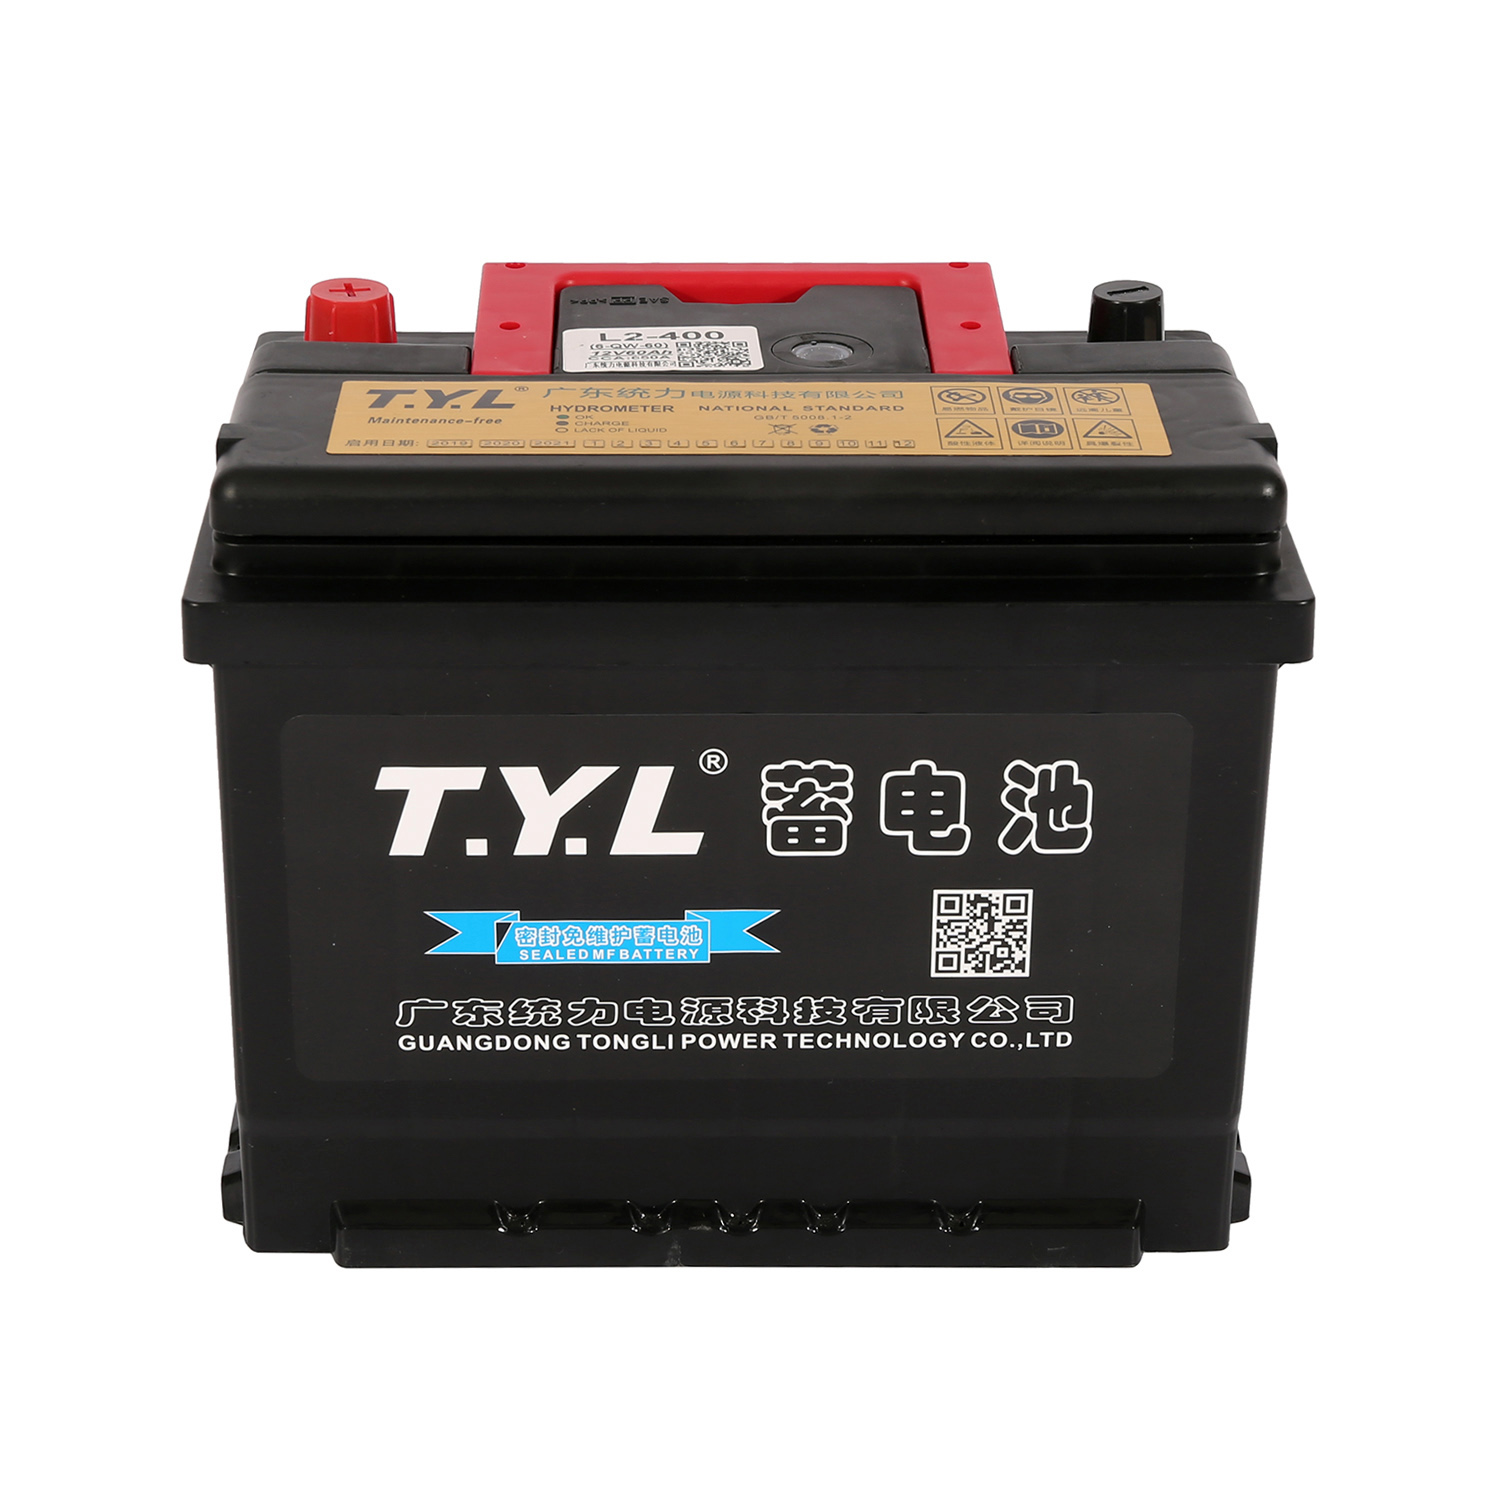 Square High Voltage Stability Car Battery For Hybrid Vehicles 